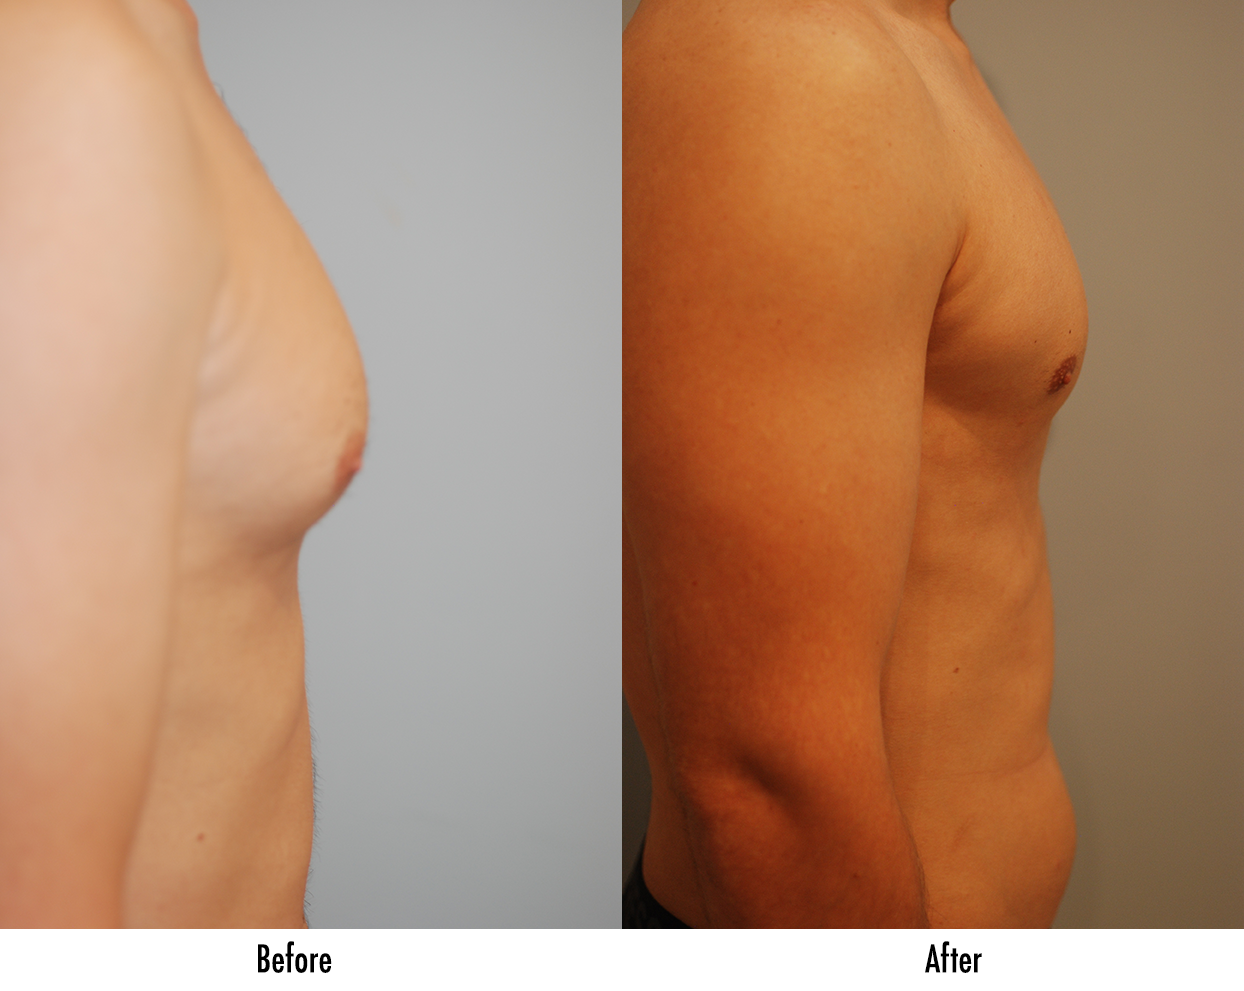 Doing Something About “Man Boobs” - Plastic Surgery in Grand